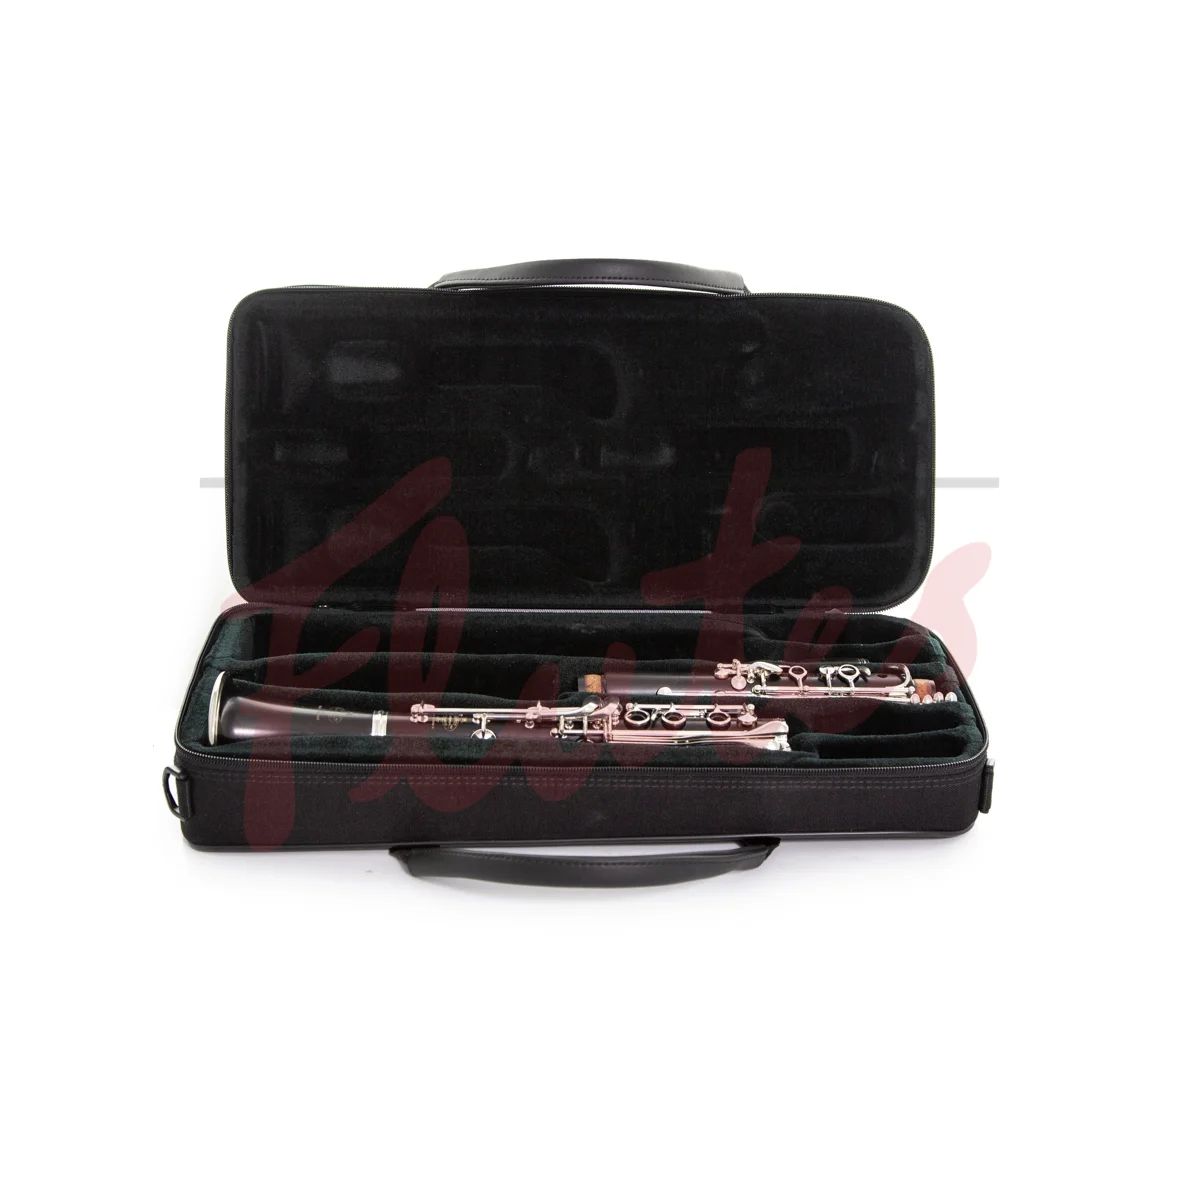 Pre-Owned Buffet-Crampon R13 A Clarinet